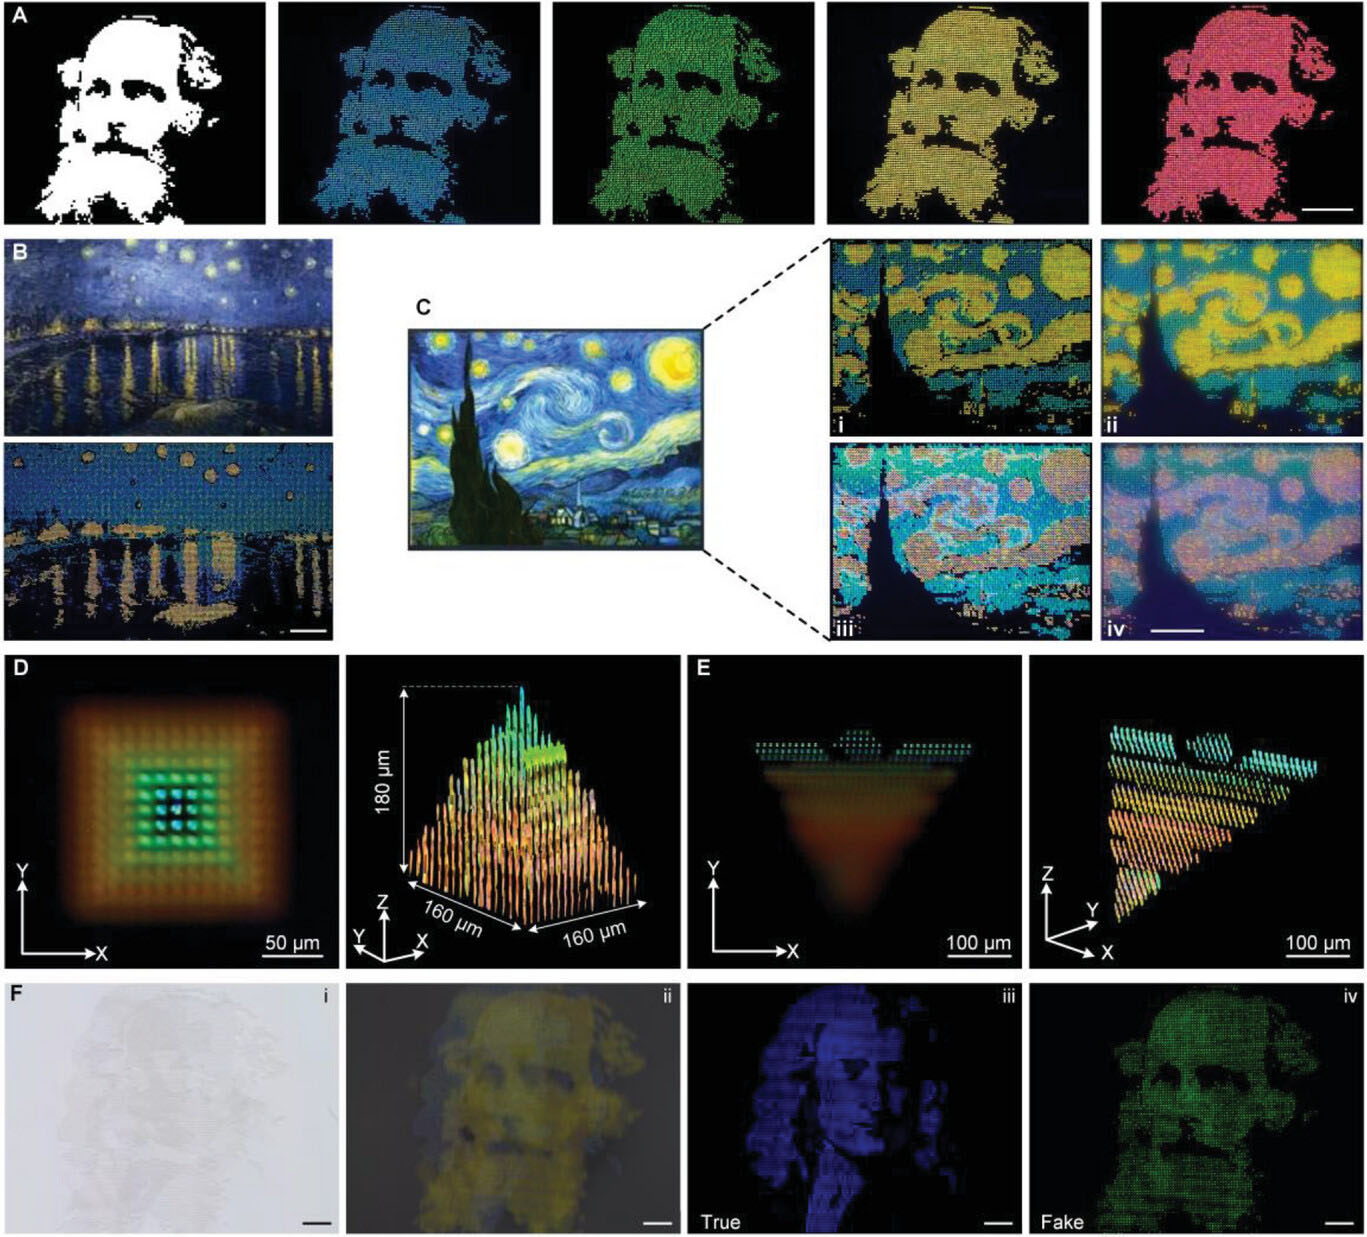 Cross-dimension imprinting of exquisite micro-amorphization-color images